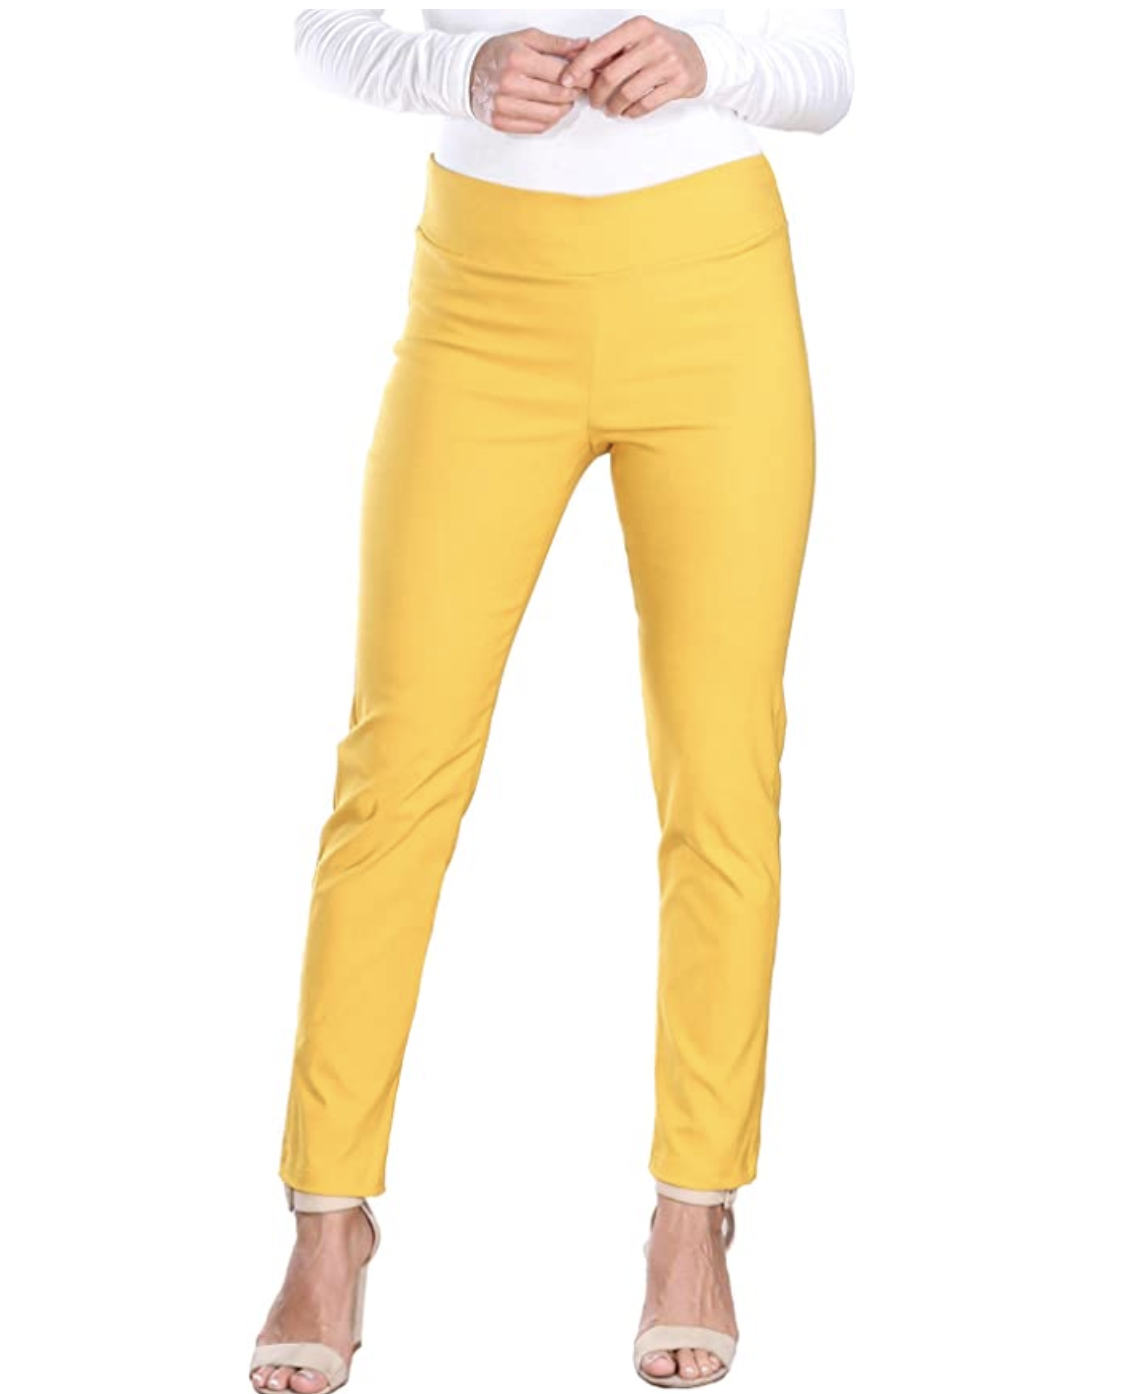 Buy > women's pull on stretch dress pants > in stock